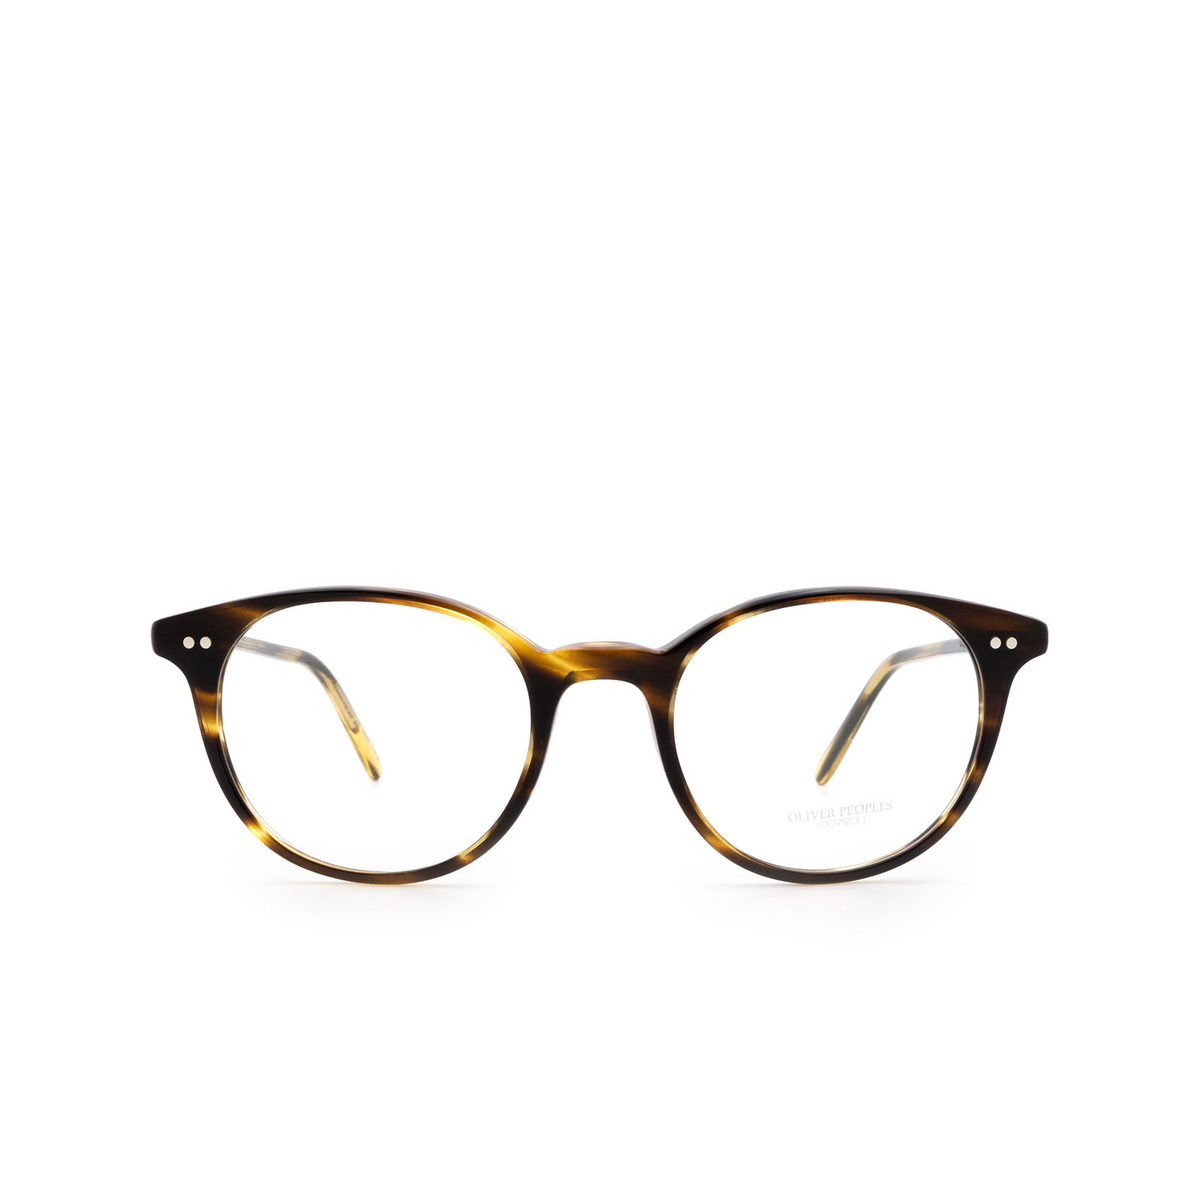 Oliver Peoples MIKETT Eyeglasses 1003 Cocobolo - 1/4